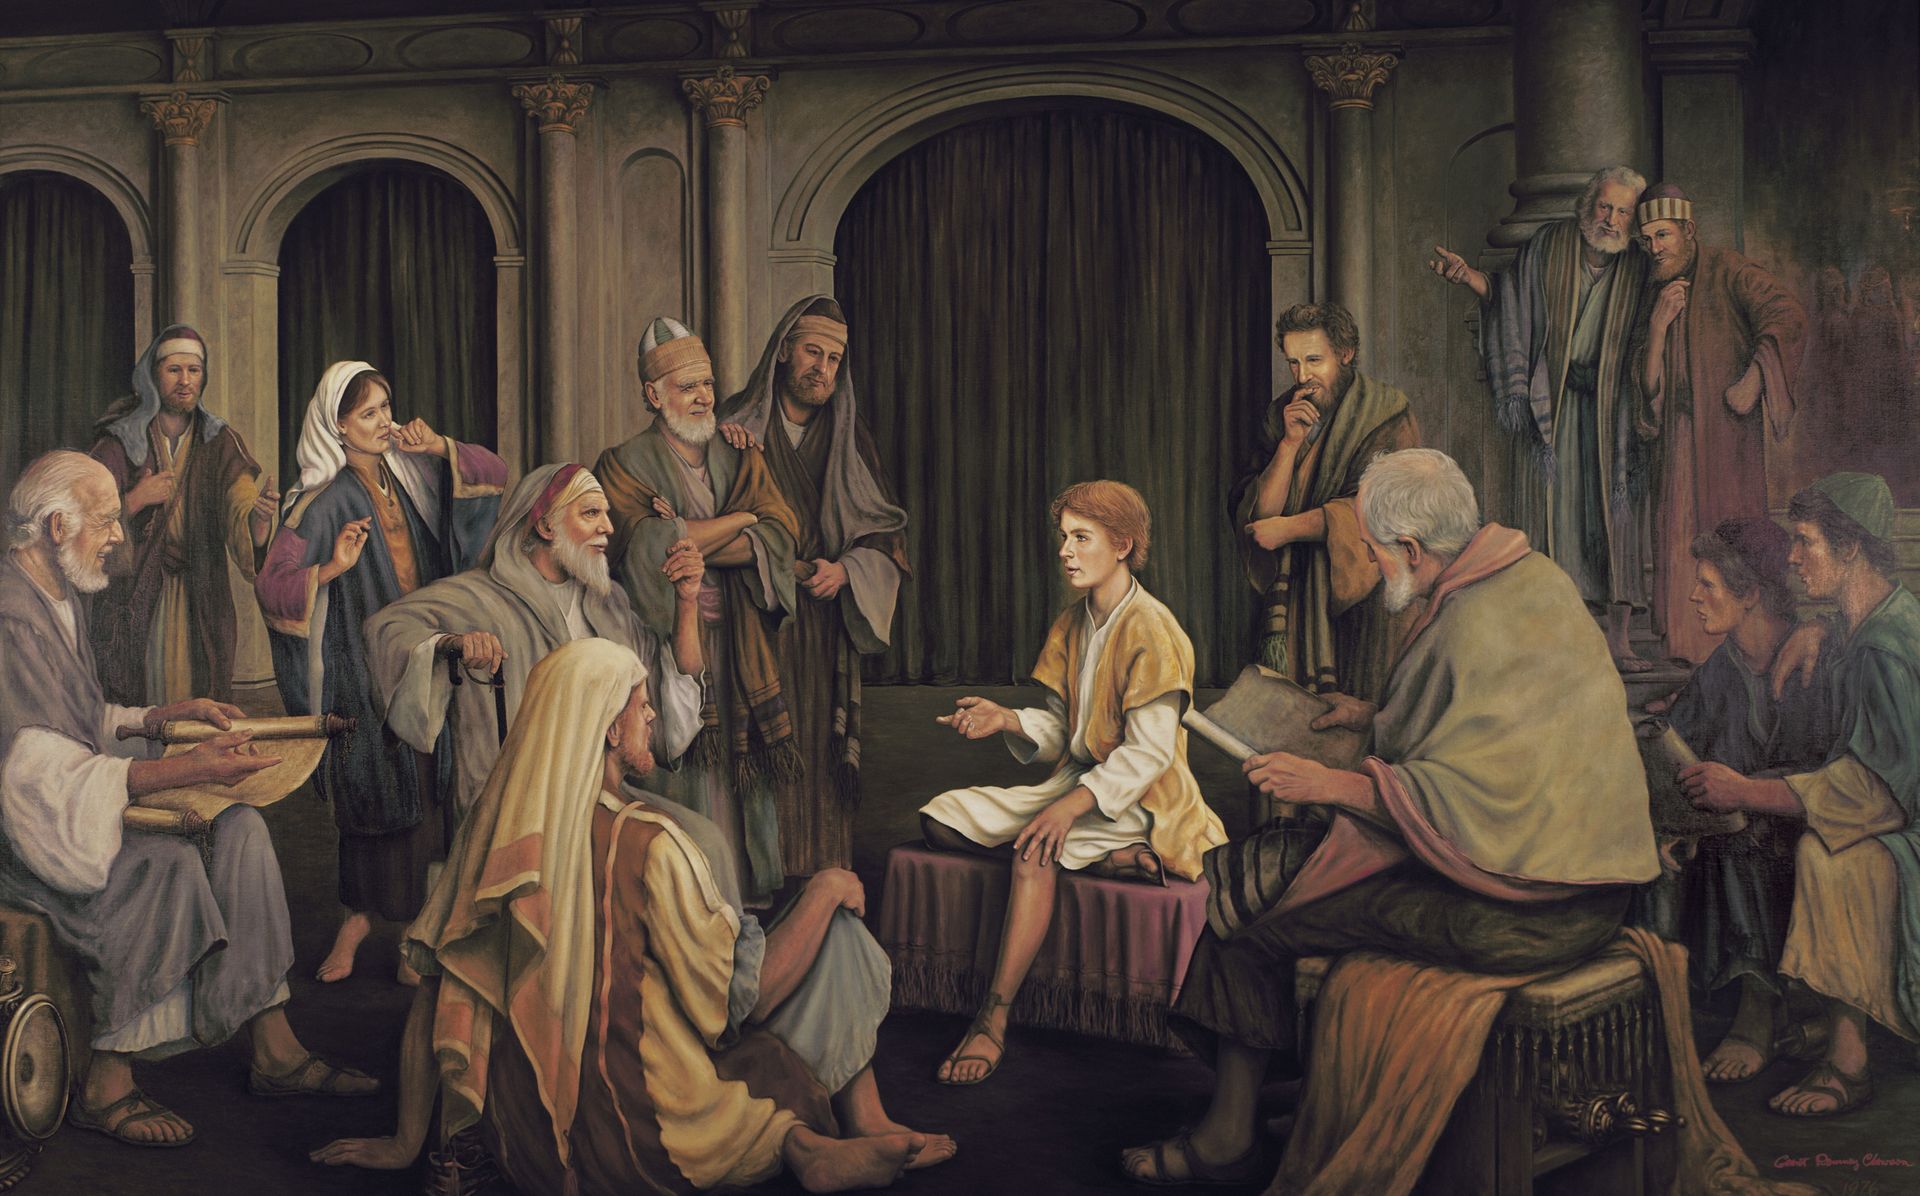 Jesus Teaching the Elders in the Temple, by Grant Romney Clawson